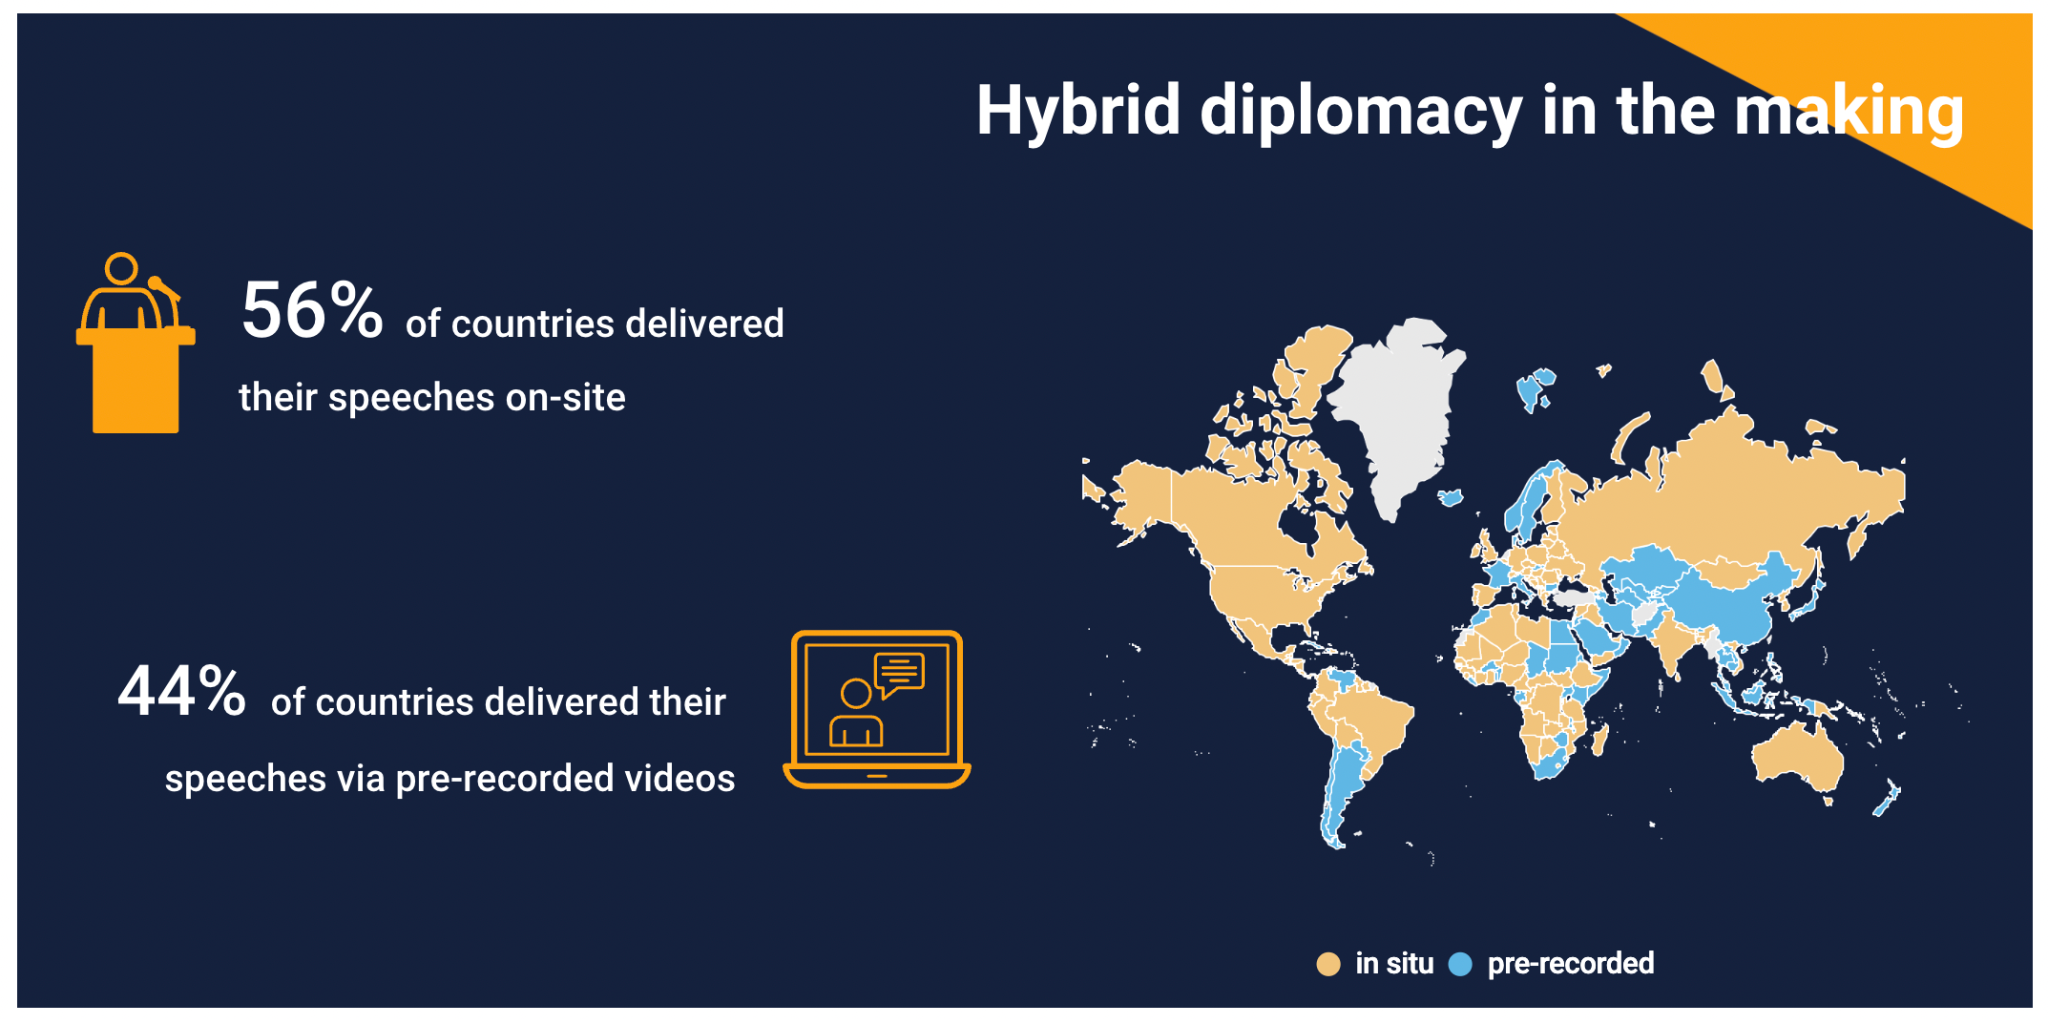 Global map titled ‘Hybrid diplomacy in the making’ shows 56% of countries delivered their speeches on-site and 44% of countries delivered their speeches via pre-recorded videos.